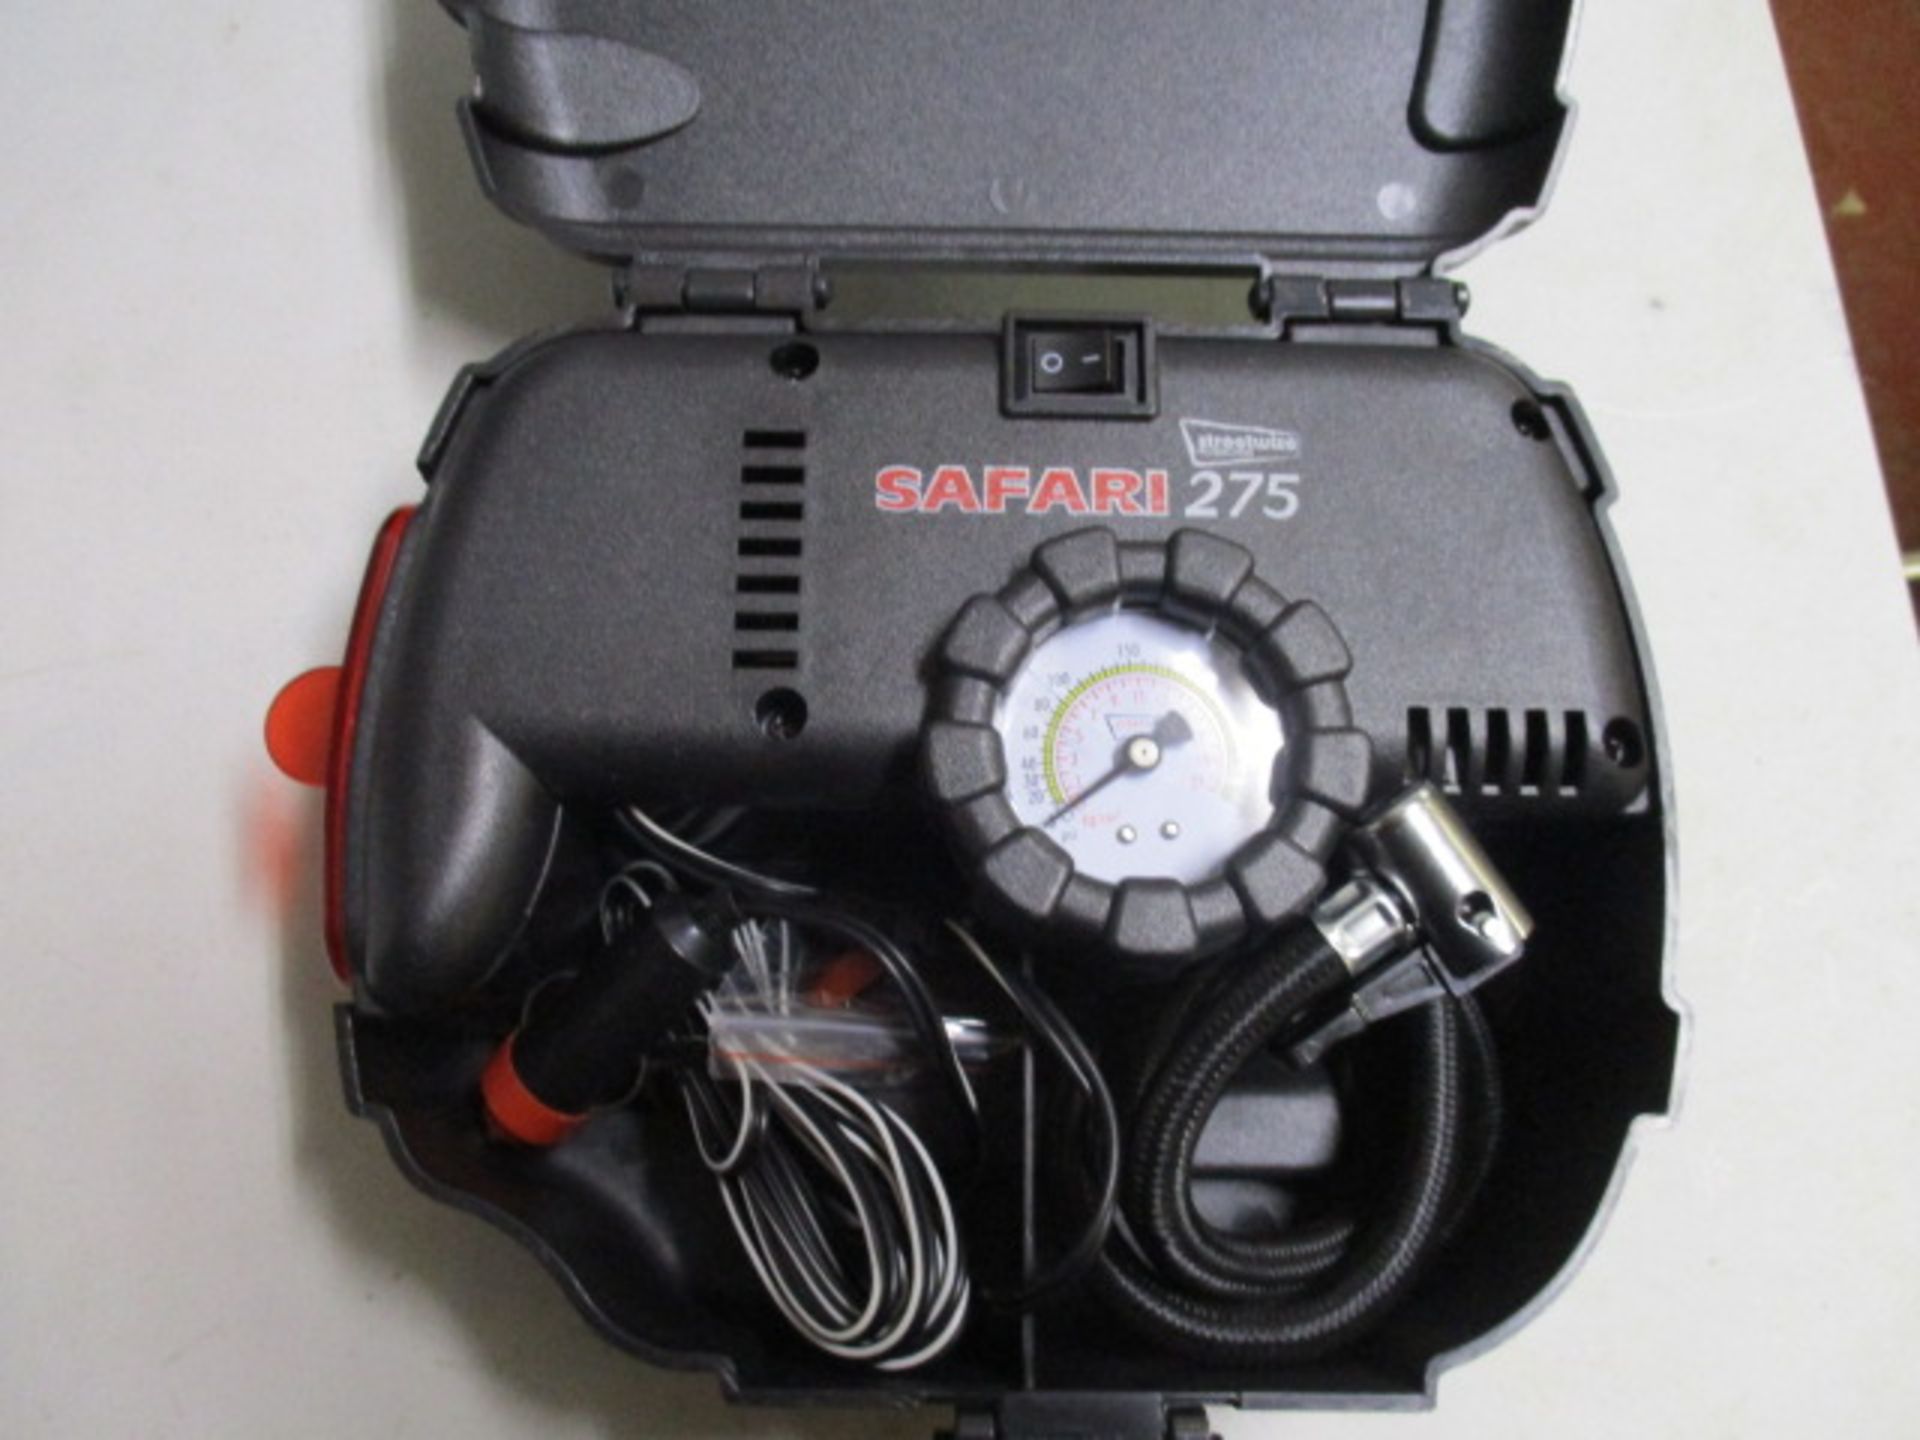 New Streetwize 12V air compressor in plastic carry case Model: Safari 275 Hi Speed inflation of - Image 2 of 2